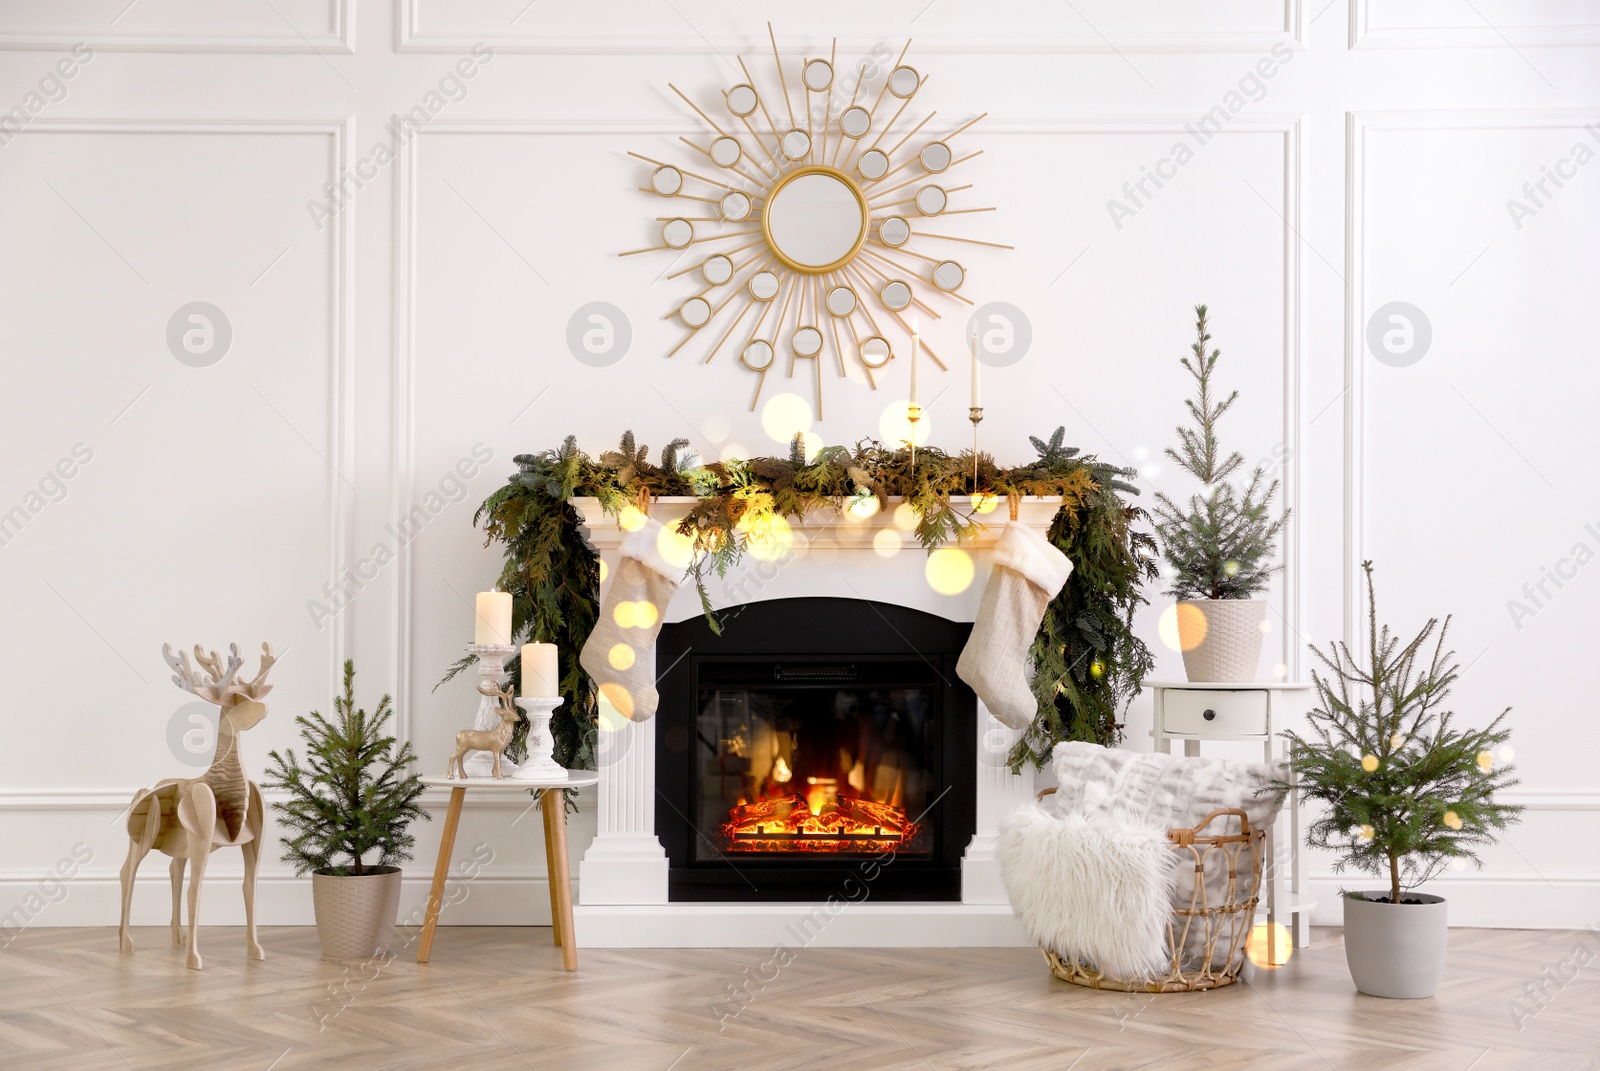 Image of Stylish room interior with fireplace and beautiful Christmas decor